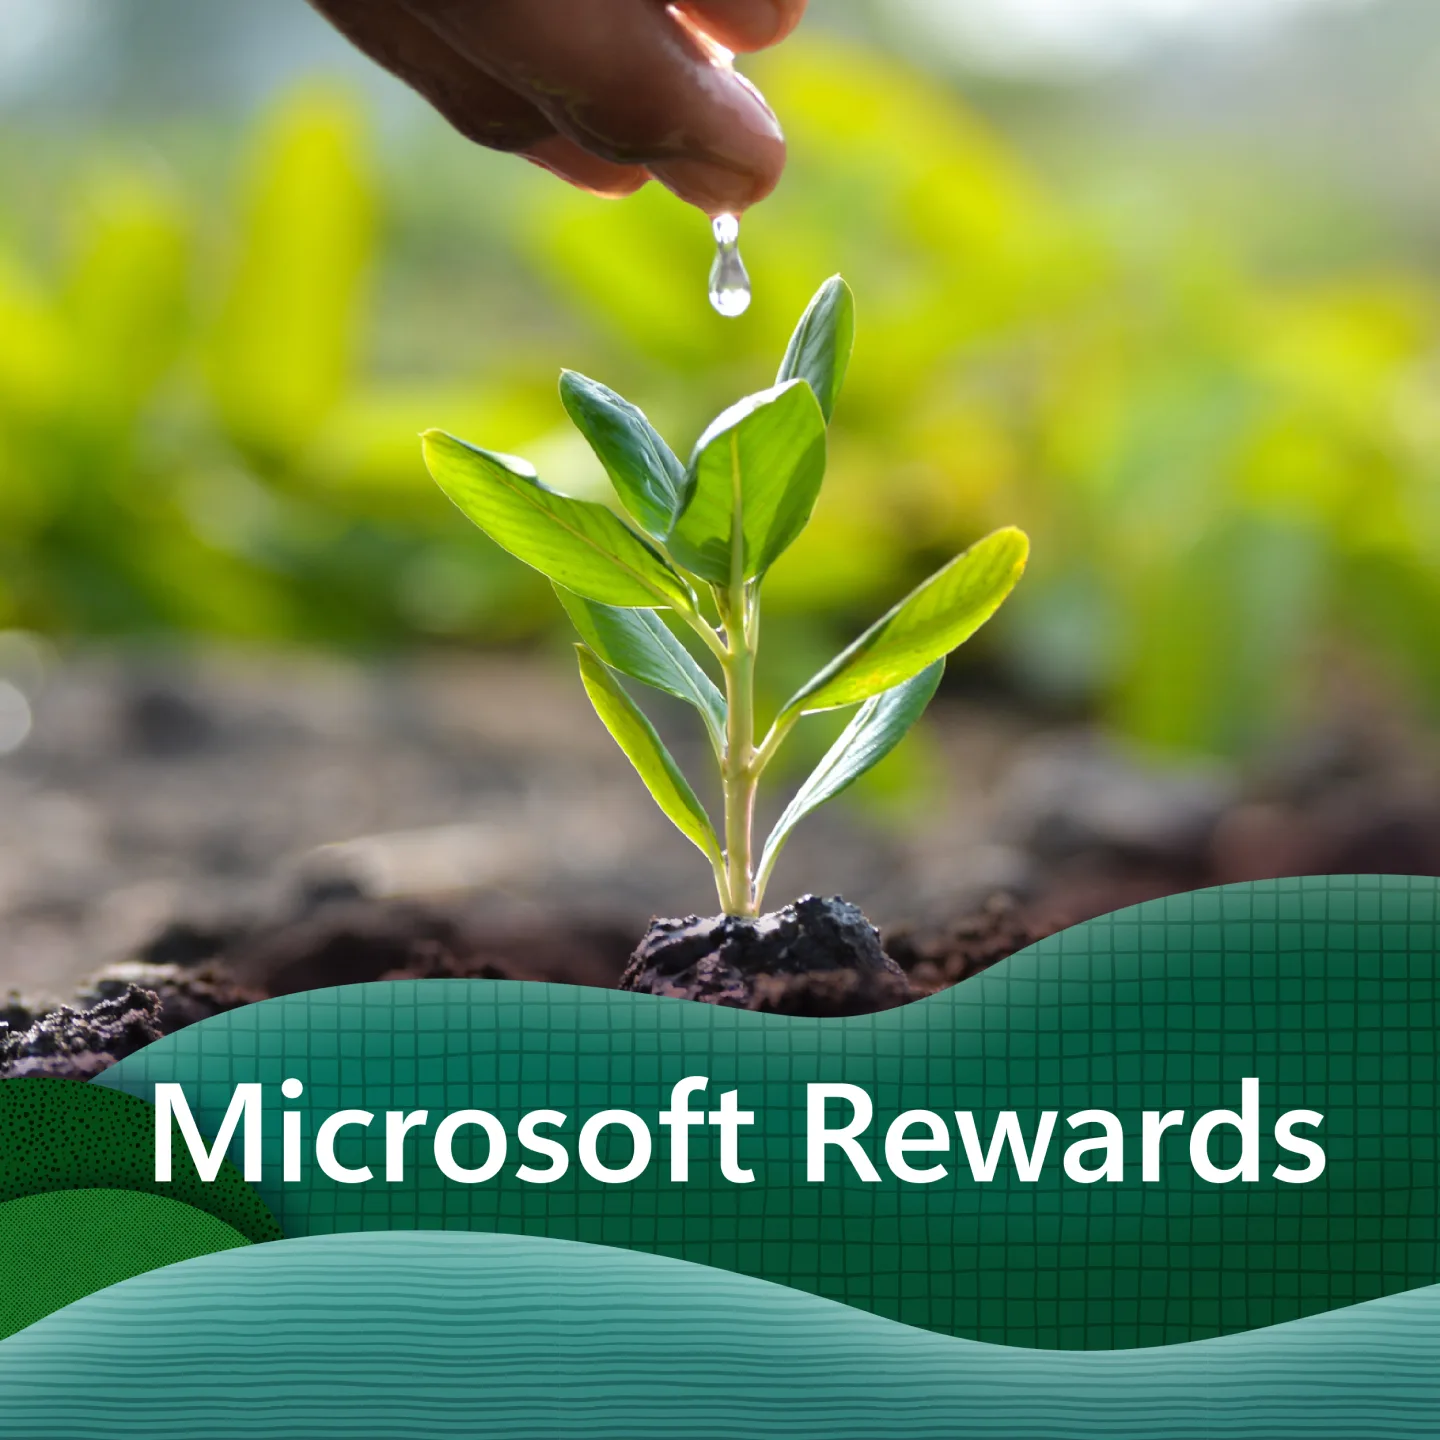 A hand waters a sprouting plant in a garden. The text “Microsoft Rewards” is in the bottom of the frame.